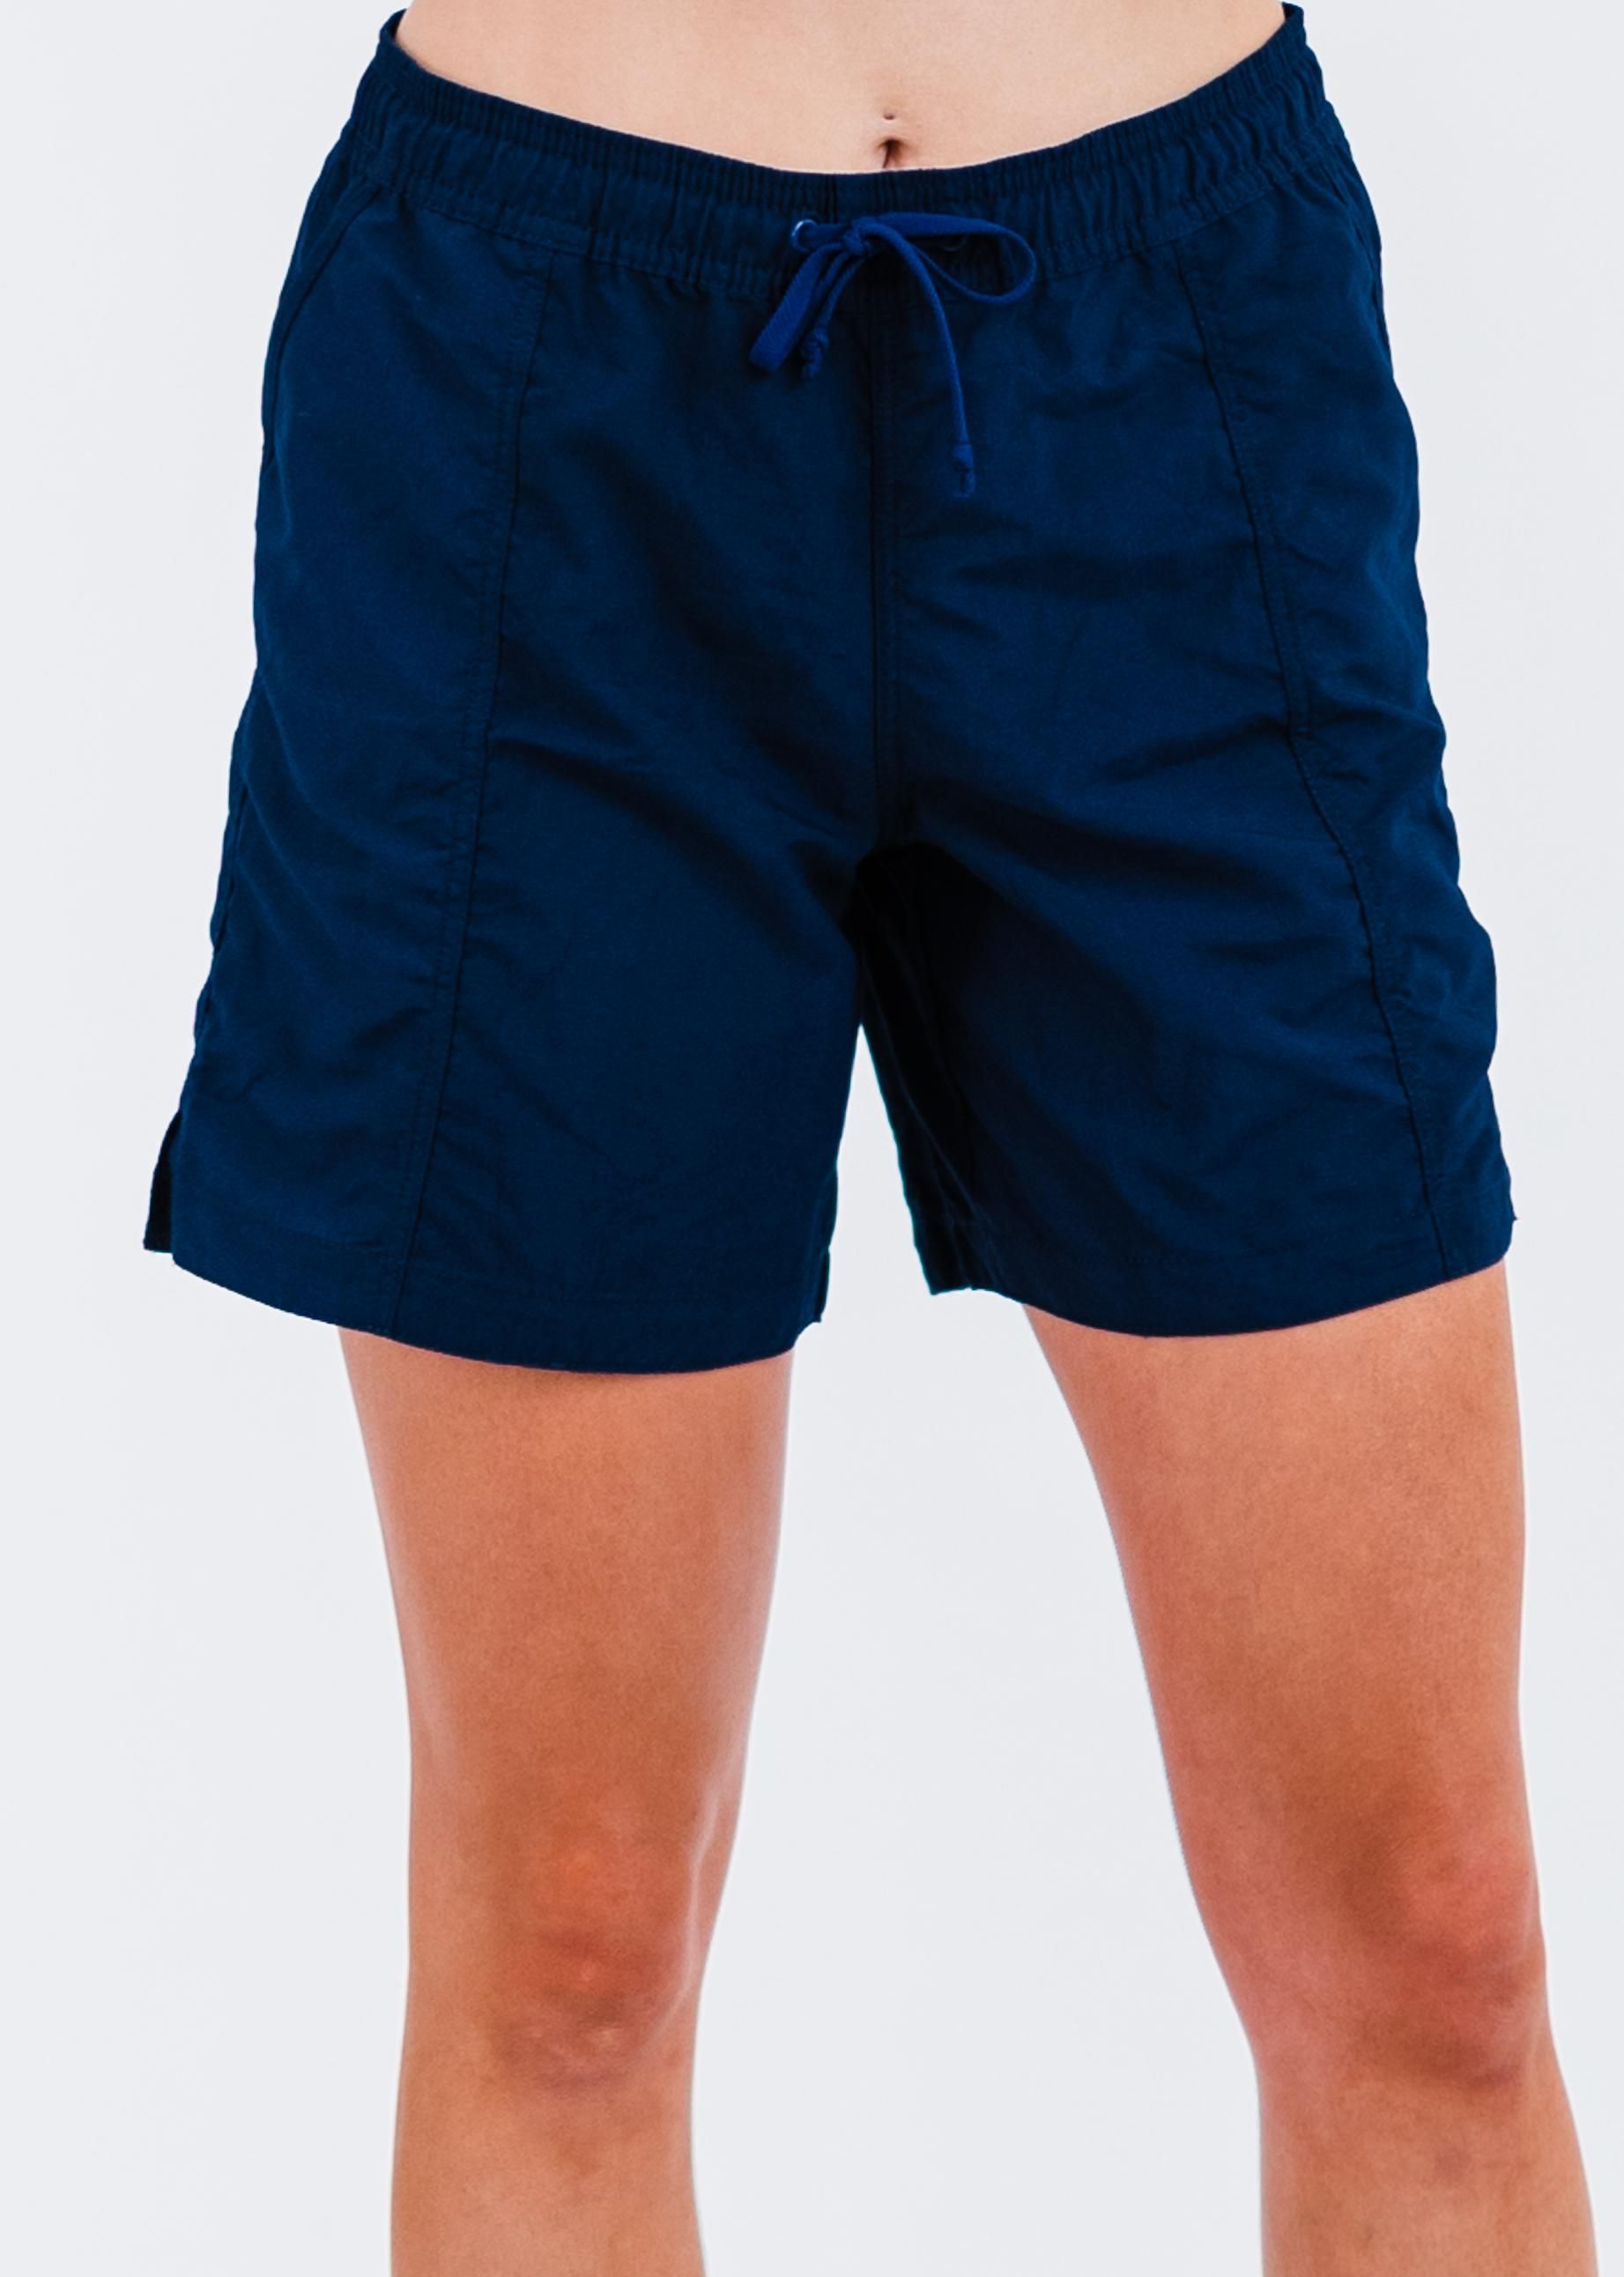 Women's Swim Shorts: Fitted & Relaxed Fit